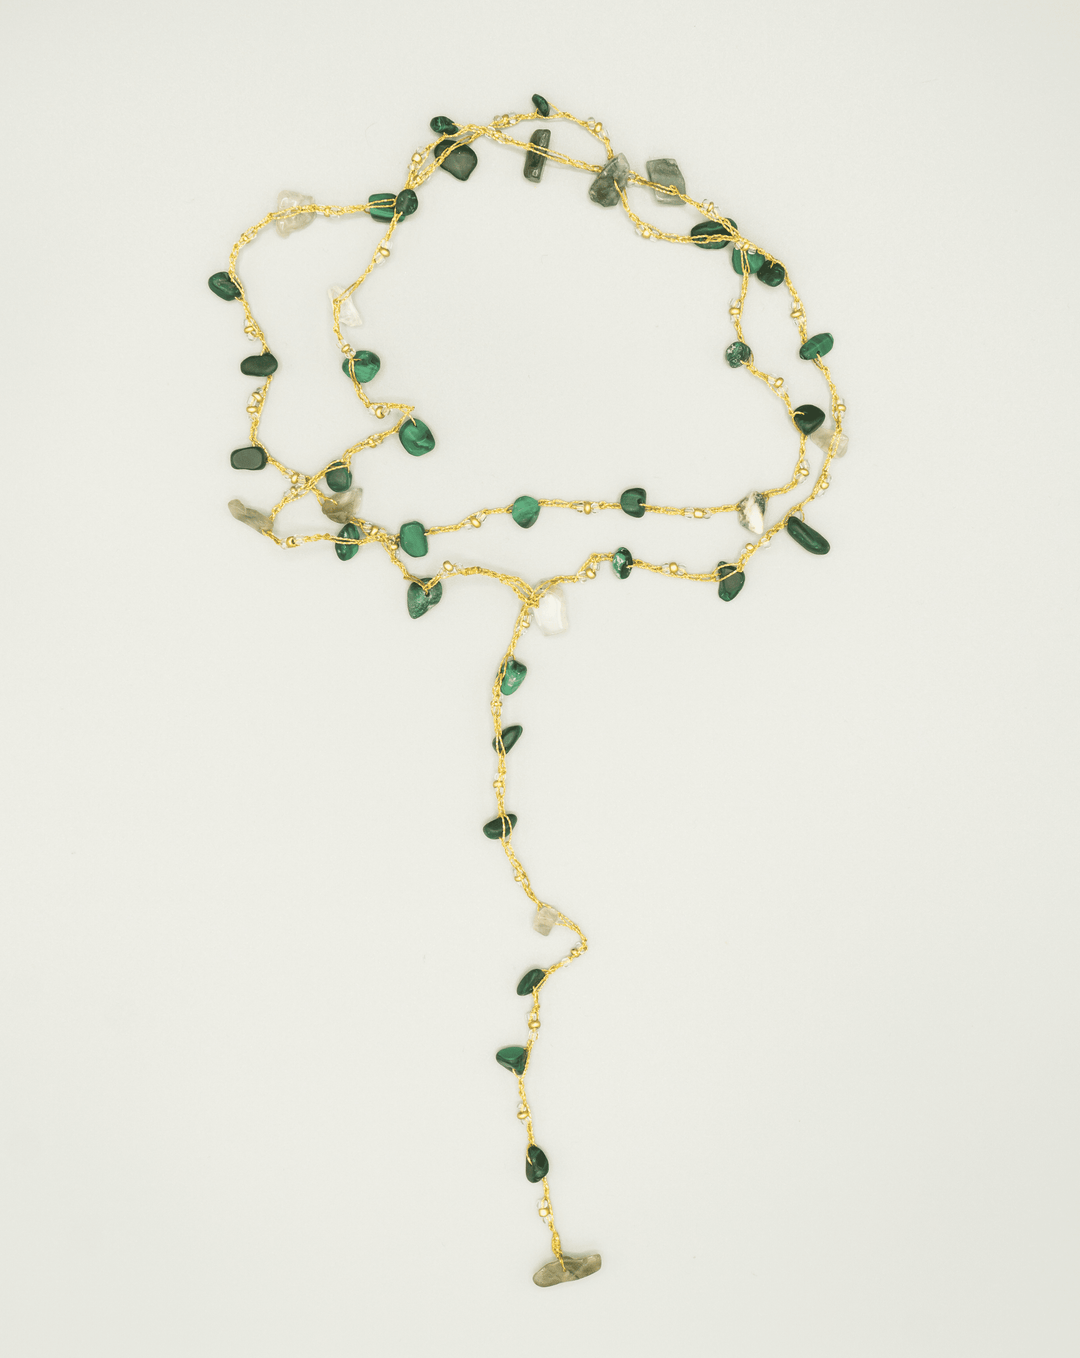 Malachite & Moss Agate Necklace in Gold Gold Rochet London 